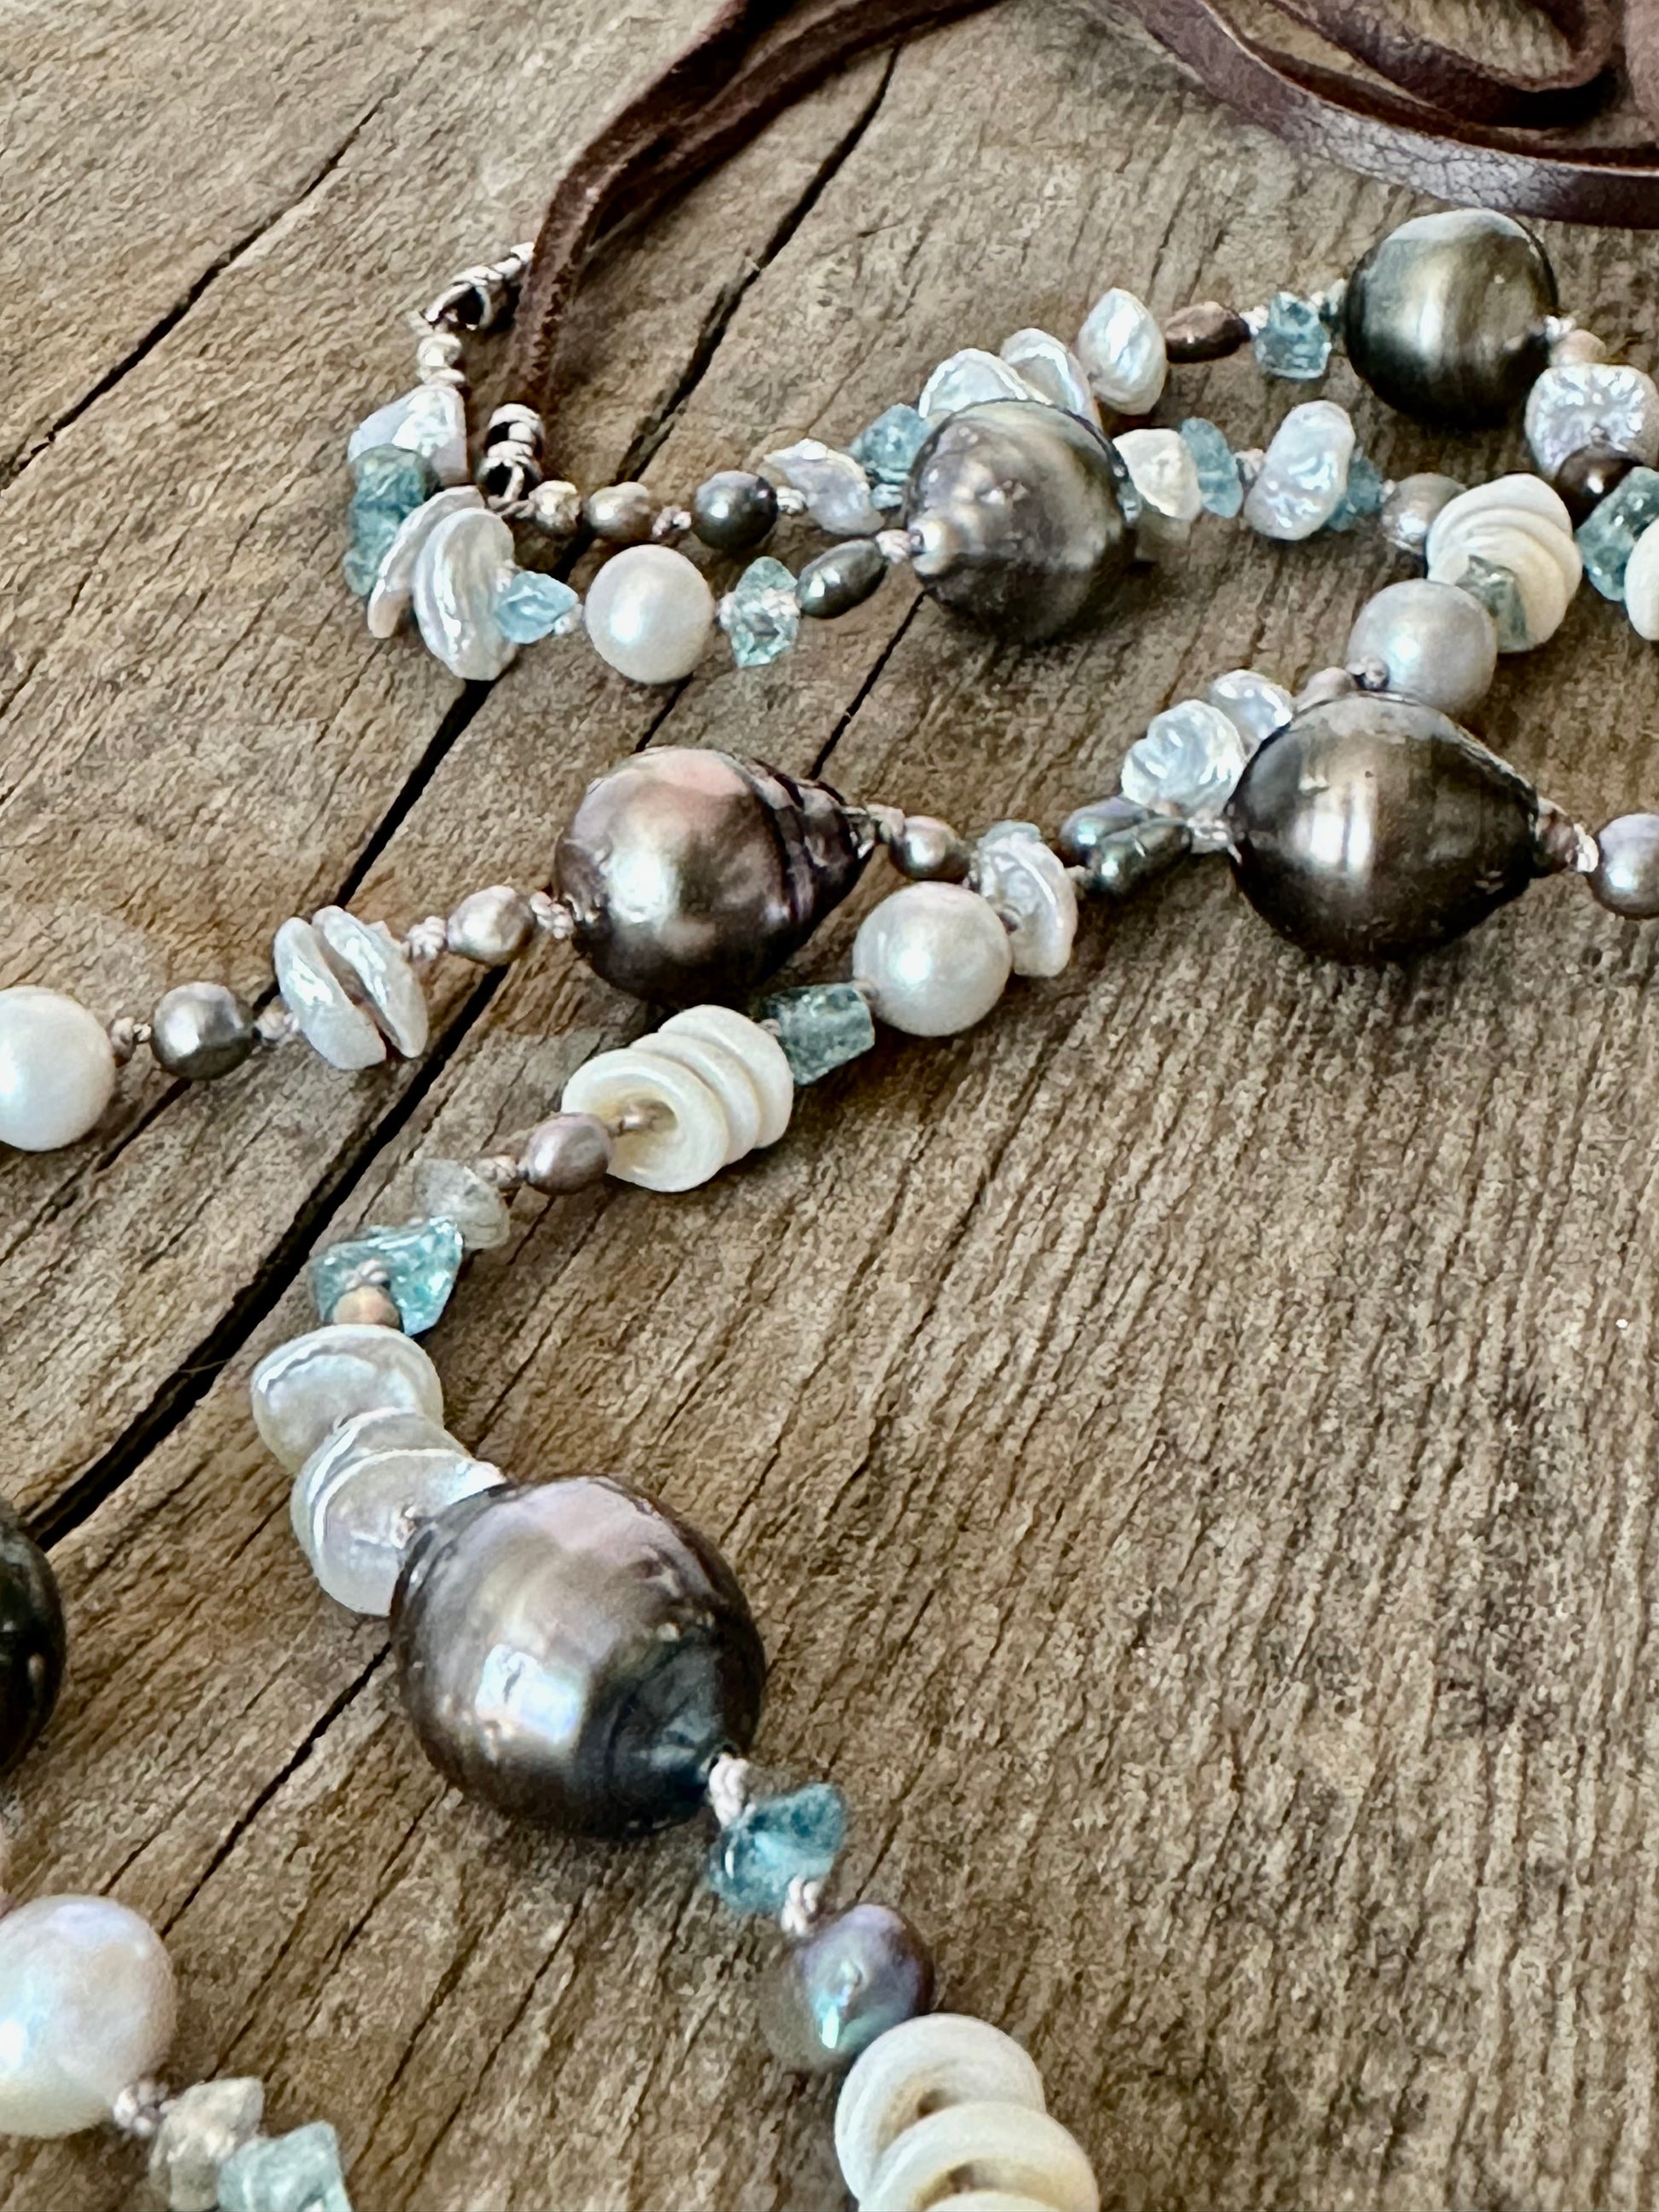 close up of long strand of Tahitian pearls, aquamarine, mini puka shells and grey seed beads  with a dark brown leather tie on a grey wooden background